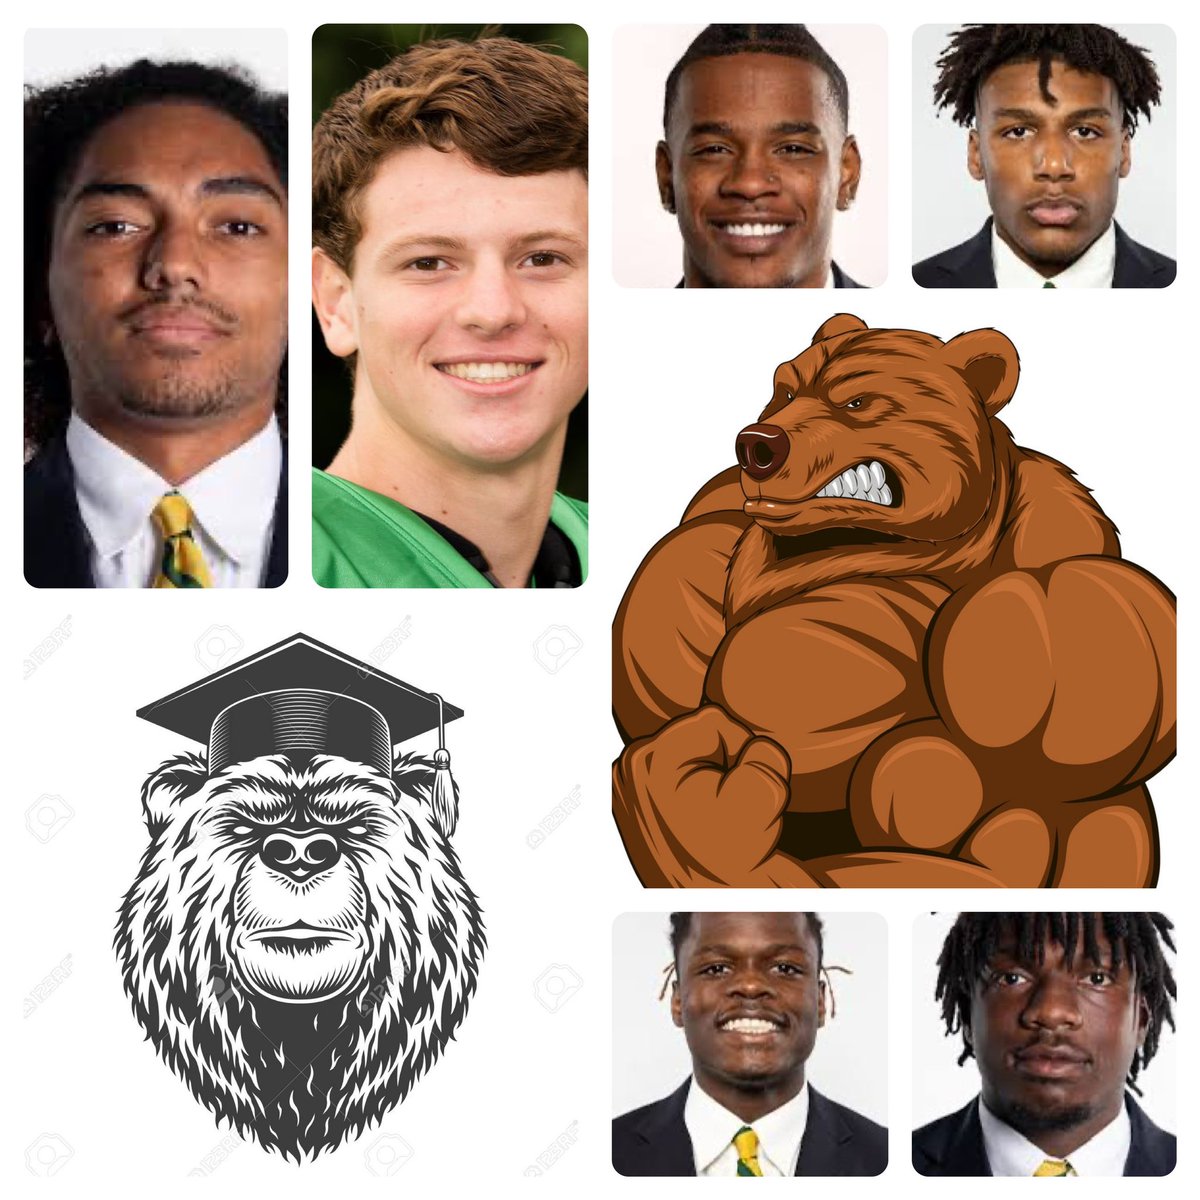 Baylor Football academic standard this week. Football is what we do, it’s not who we are. #Sicem #StudentAthlete proud of these guys for taking advantage of their opportunities @jmburton24 @WellerSeth_26 @jamaalbell4 @Josh_Cameron34 @D1_tron @JavonGipson2021